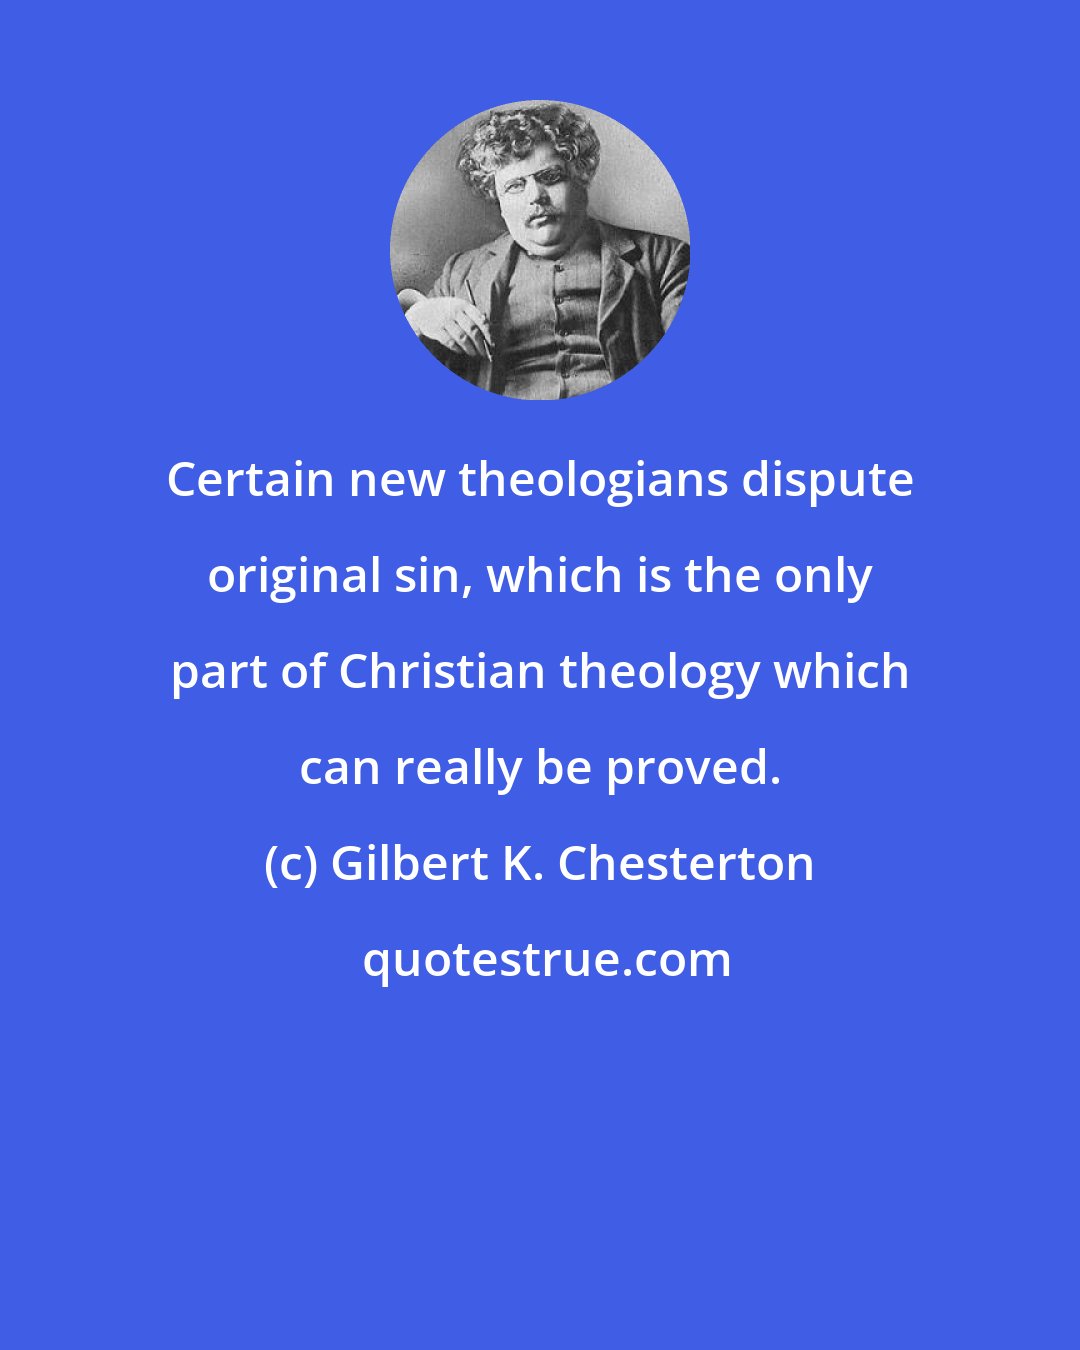 Gilbert K. Chesterton: Certain new theologians dispute original sin, which is the only part of Christian theology which can really be proved.